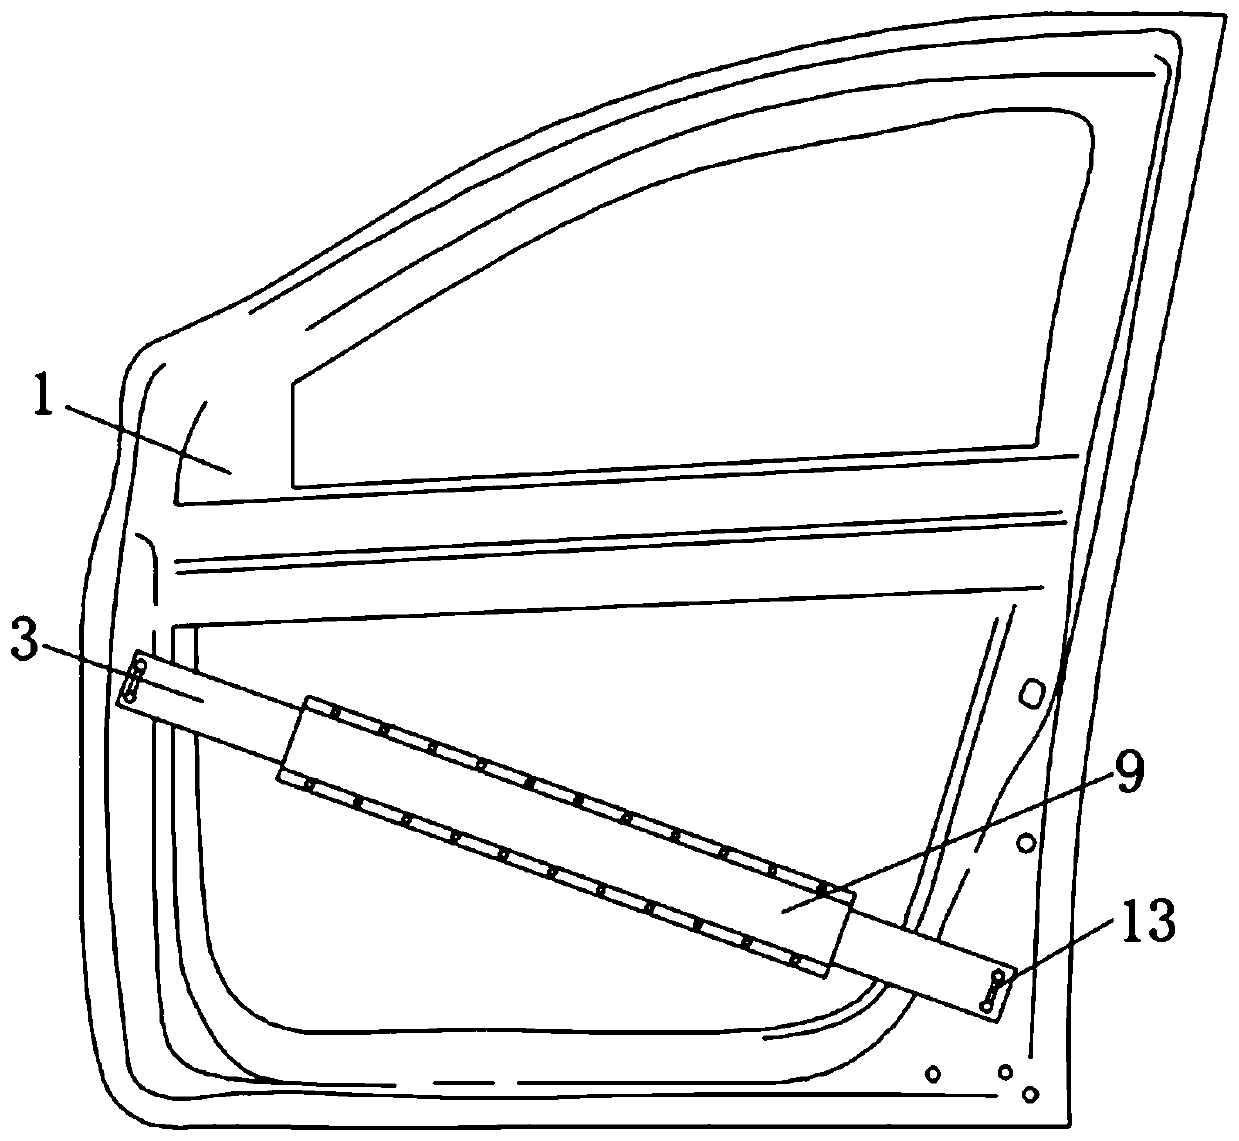 Anti-collision structure for vehicle side door